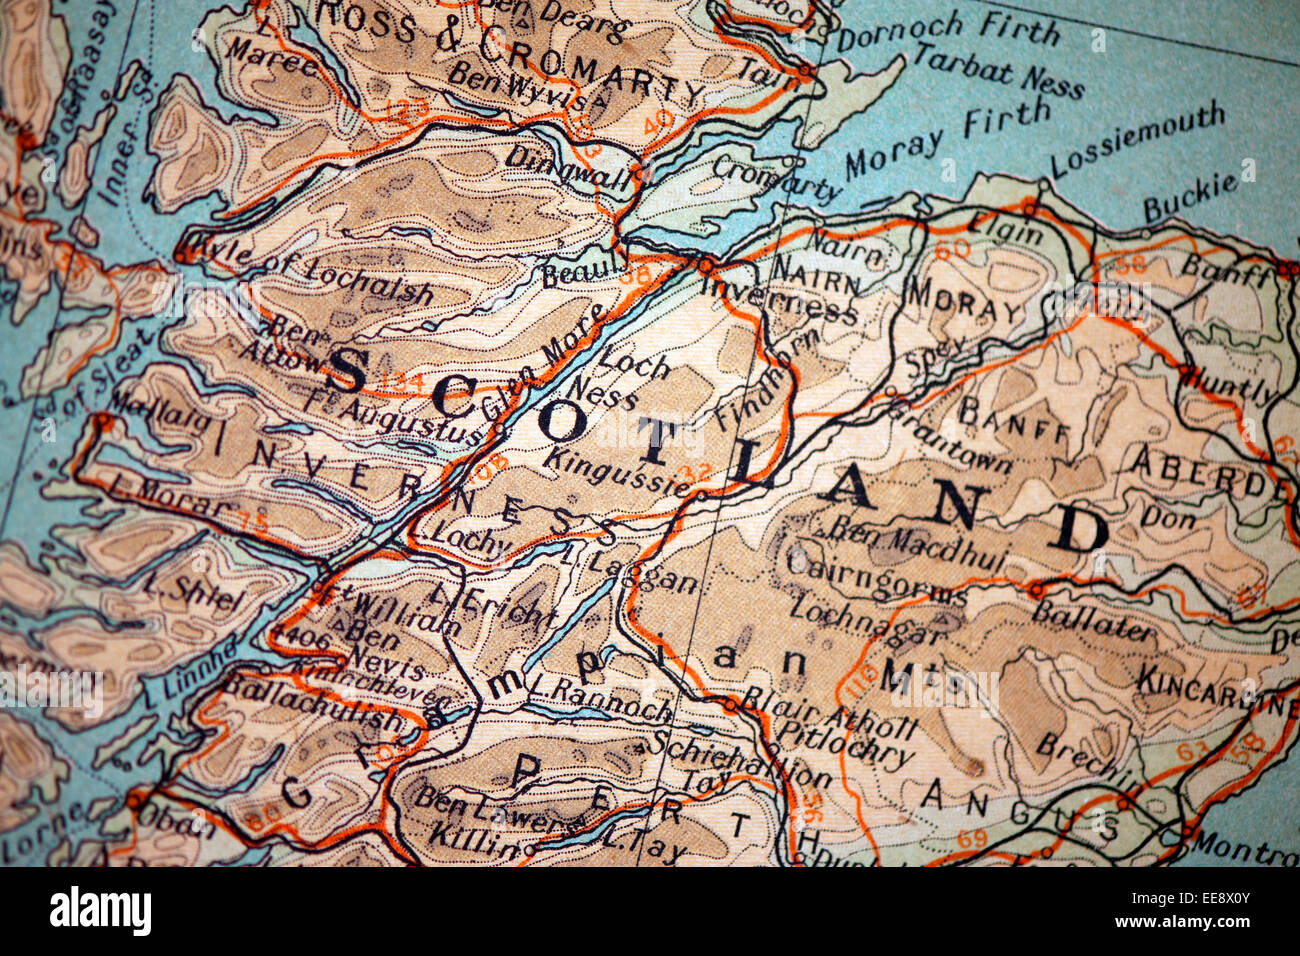 Section taken from Bartholomew's Western Europe Automobile Cloth Map showing Scotland Stock Photo